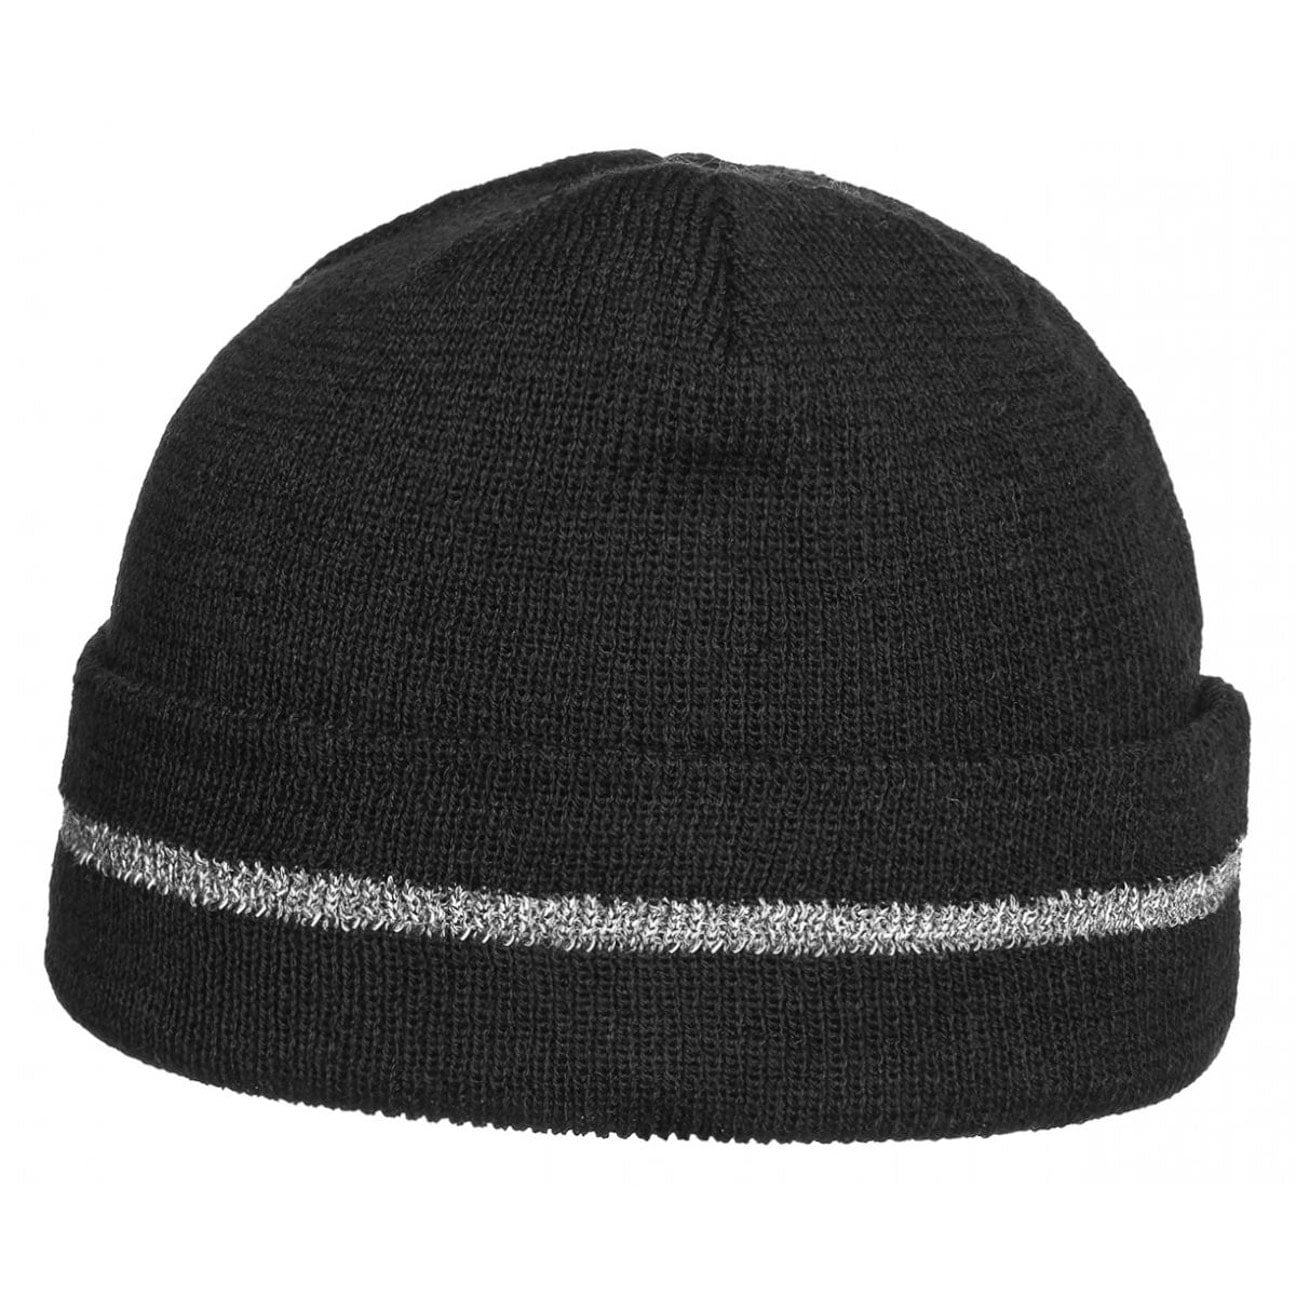 Workout Knit Hat with Reflective Cuff, EUR 9,95 --> Hats, caps ...